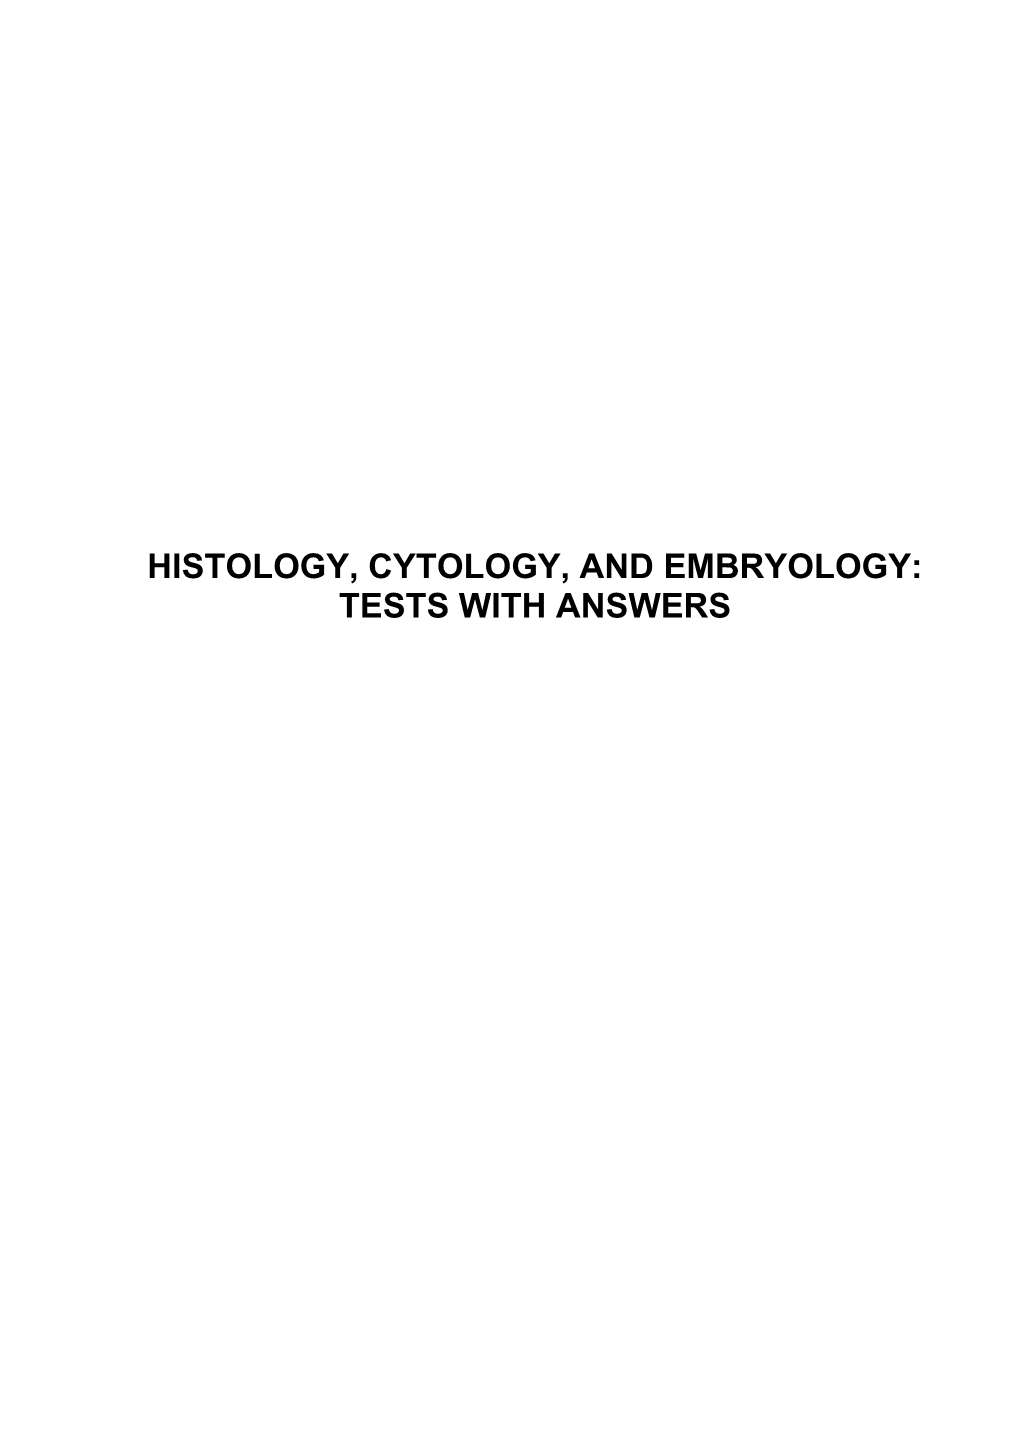 Histology, Cytology, and Embryology: Tests with Answers